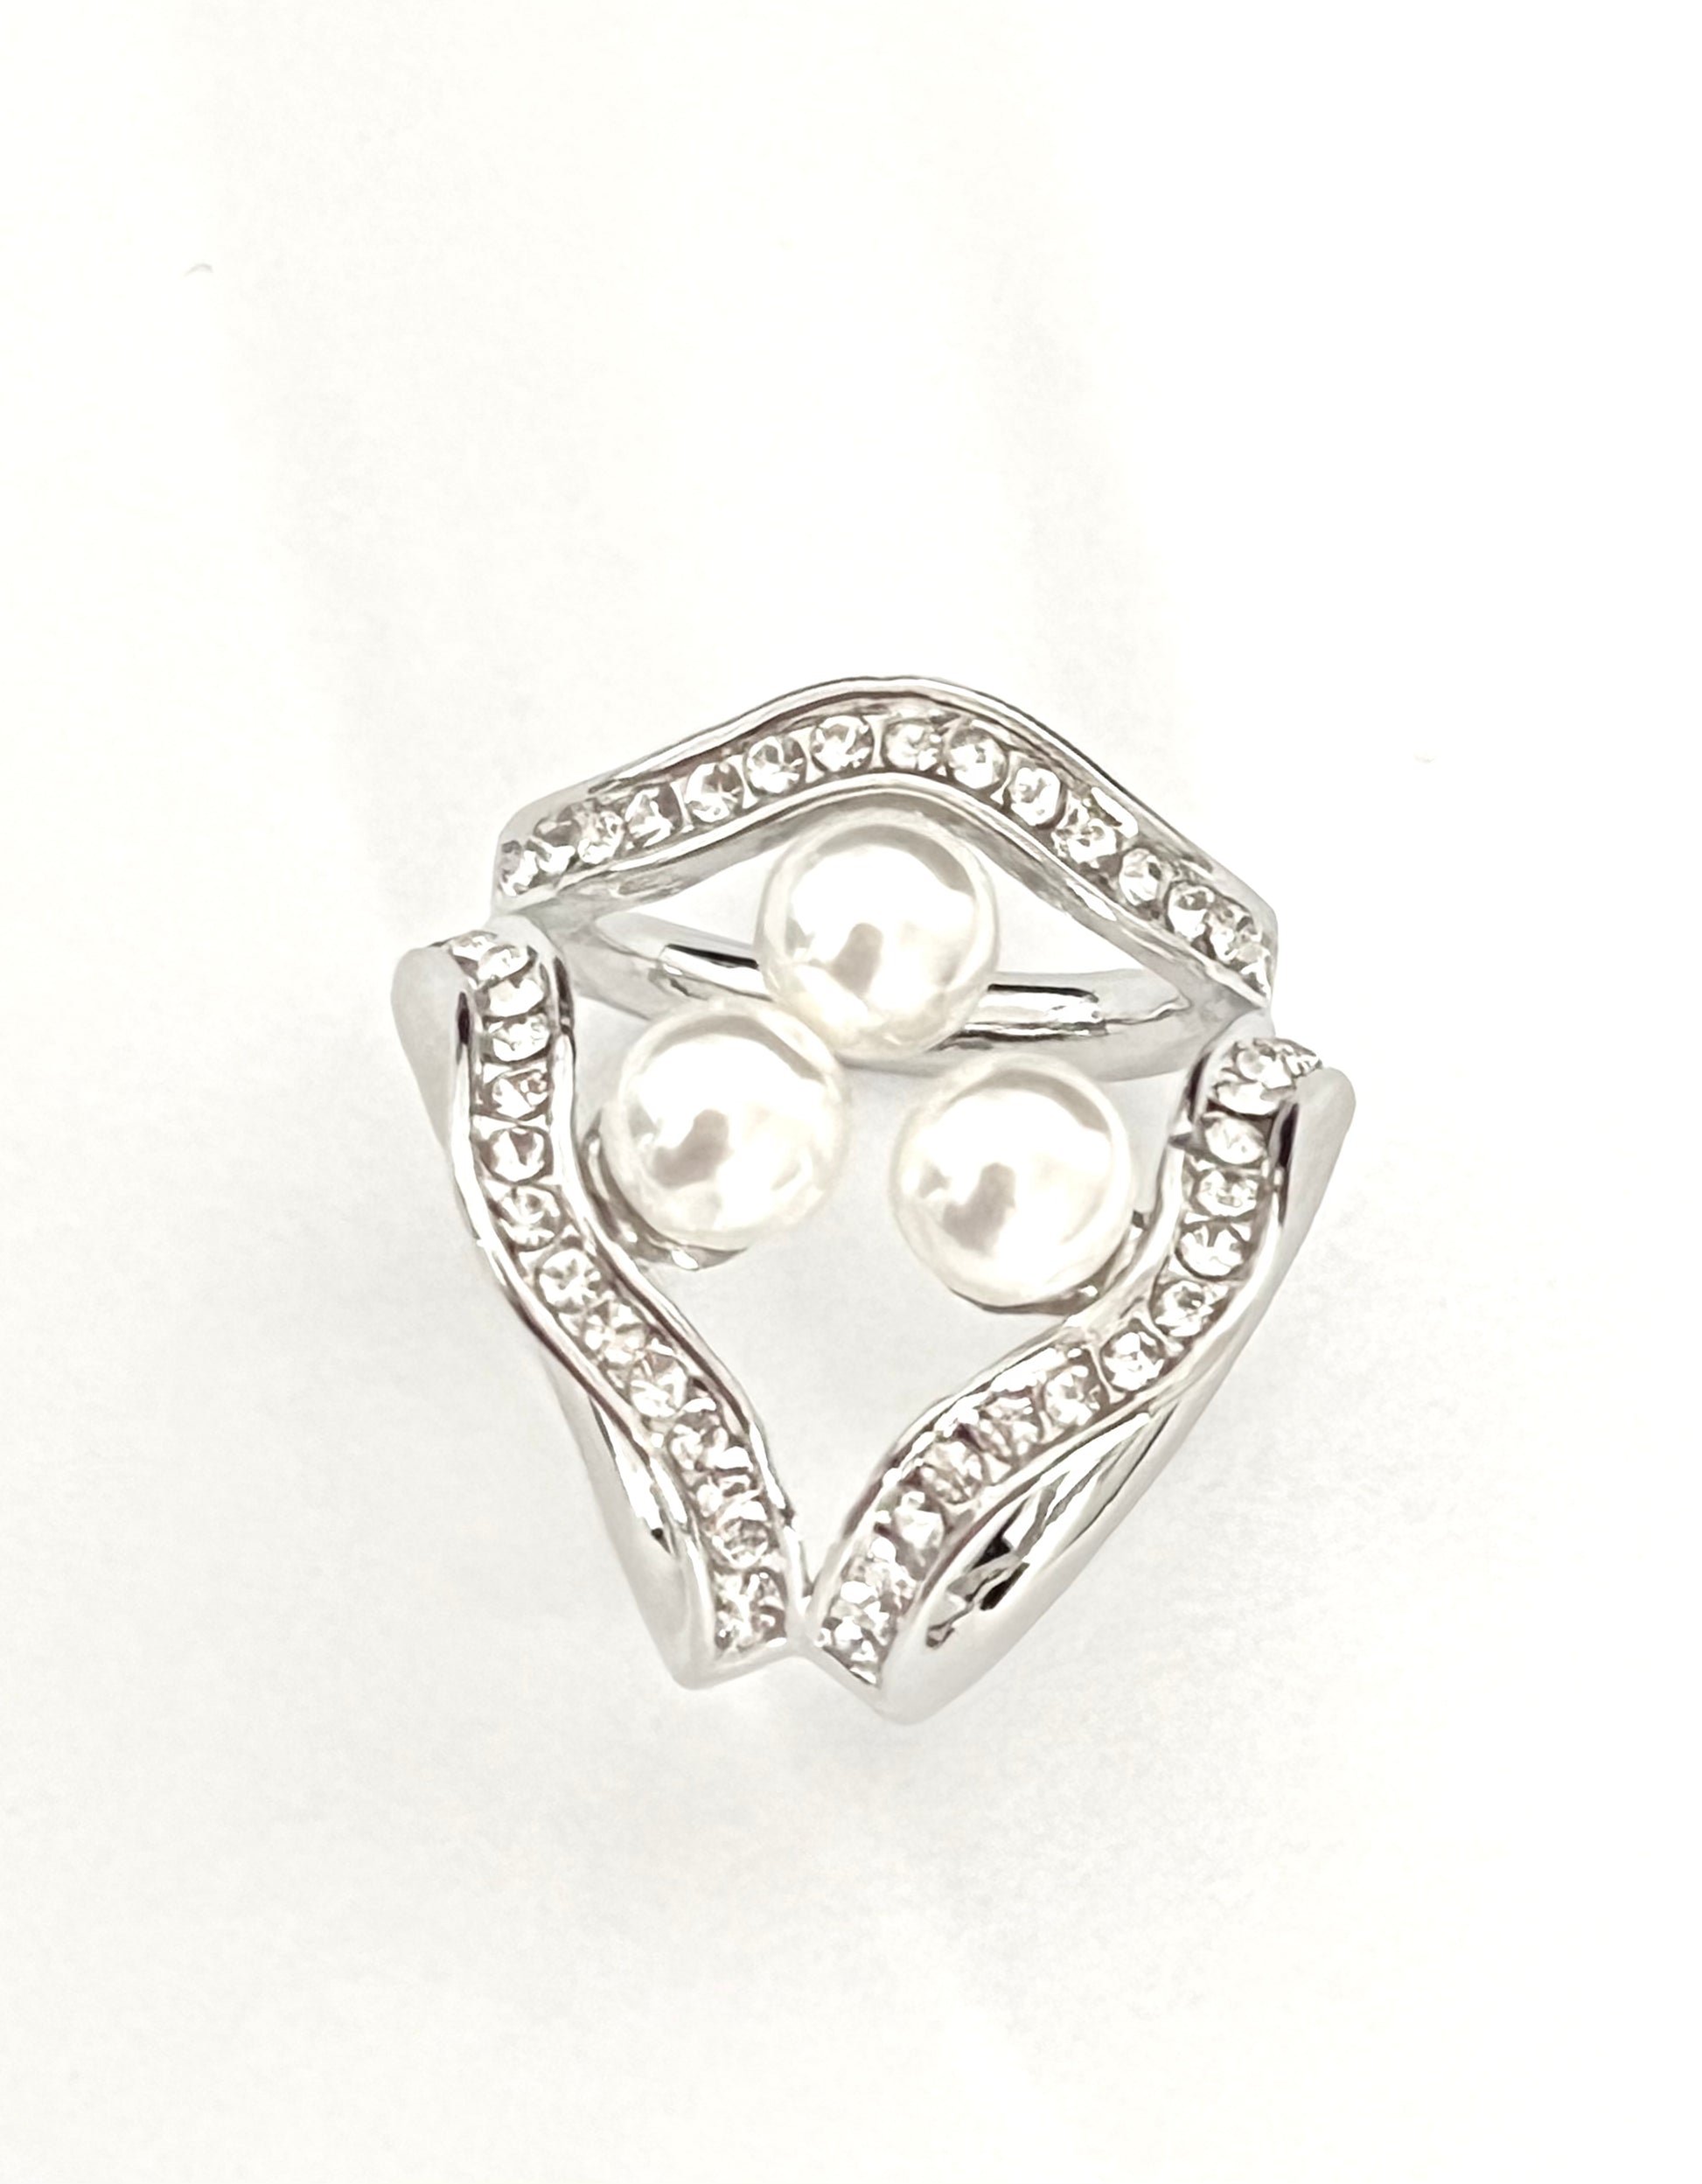 Scarf Ring / Silver Pearl – Stacy Bradley Design